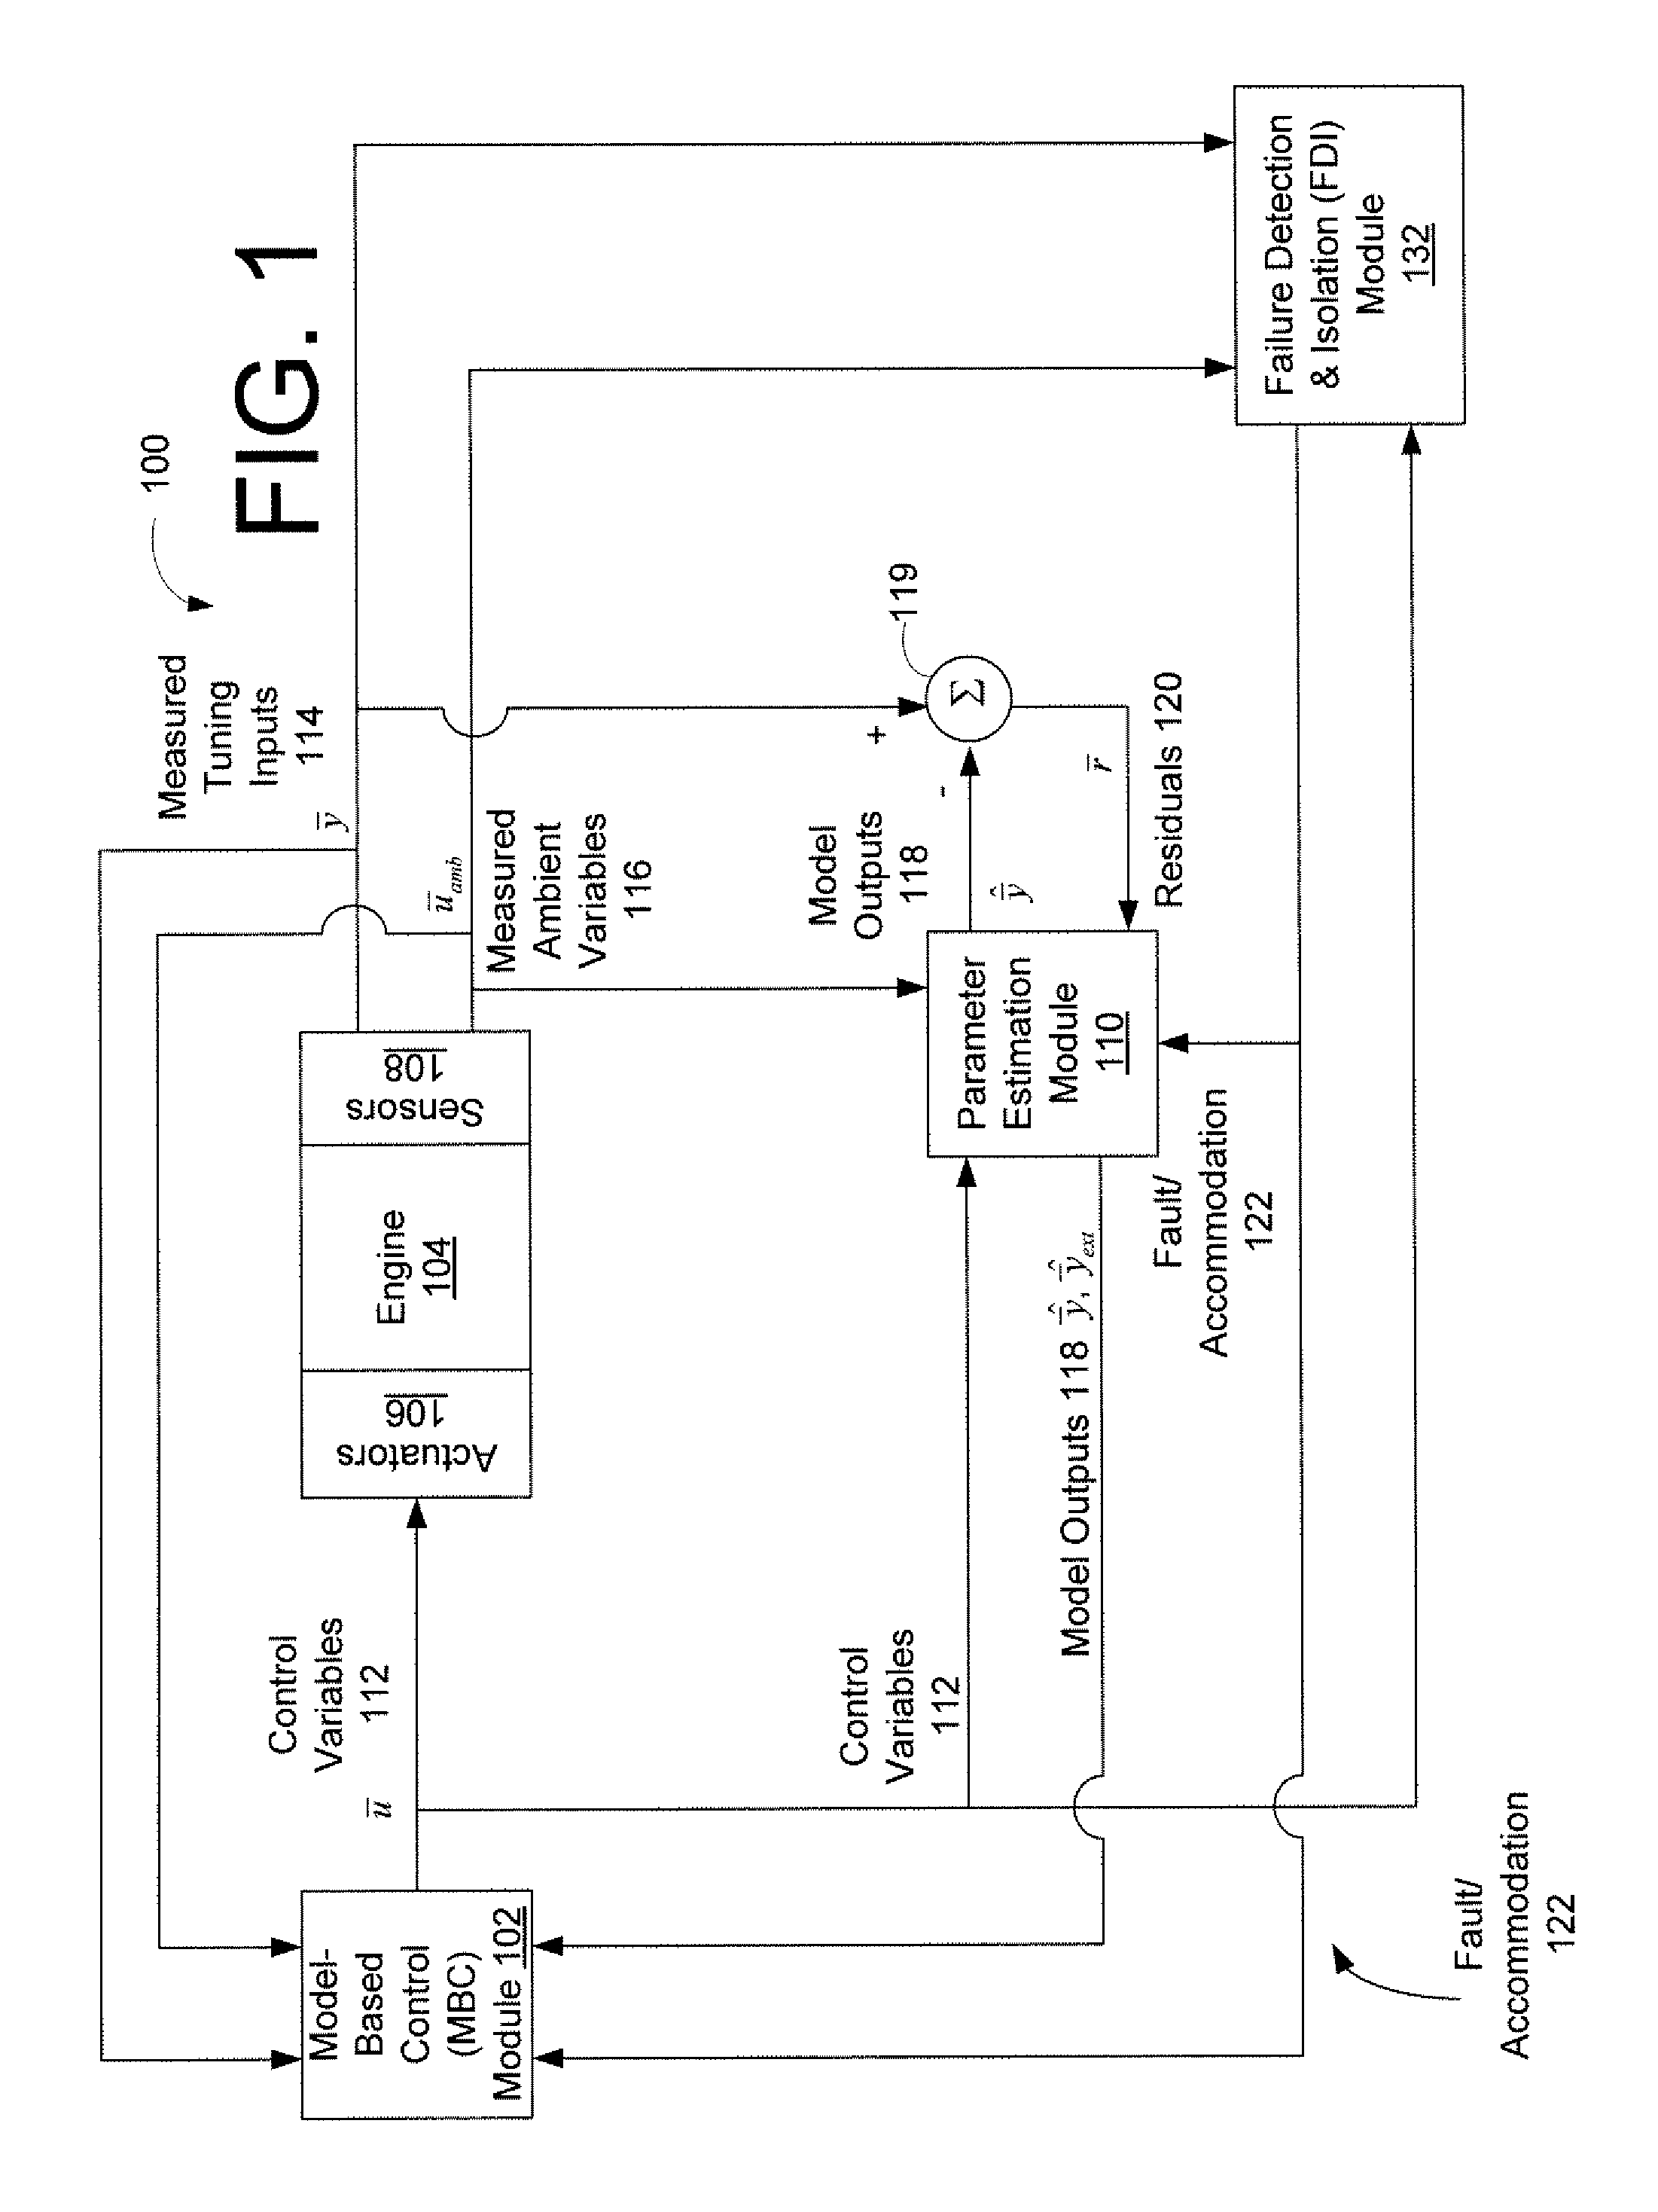 Systems and Methods for Model-Based Sensor Fault Detection and Isolation